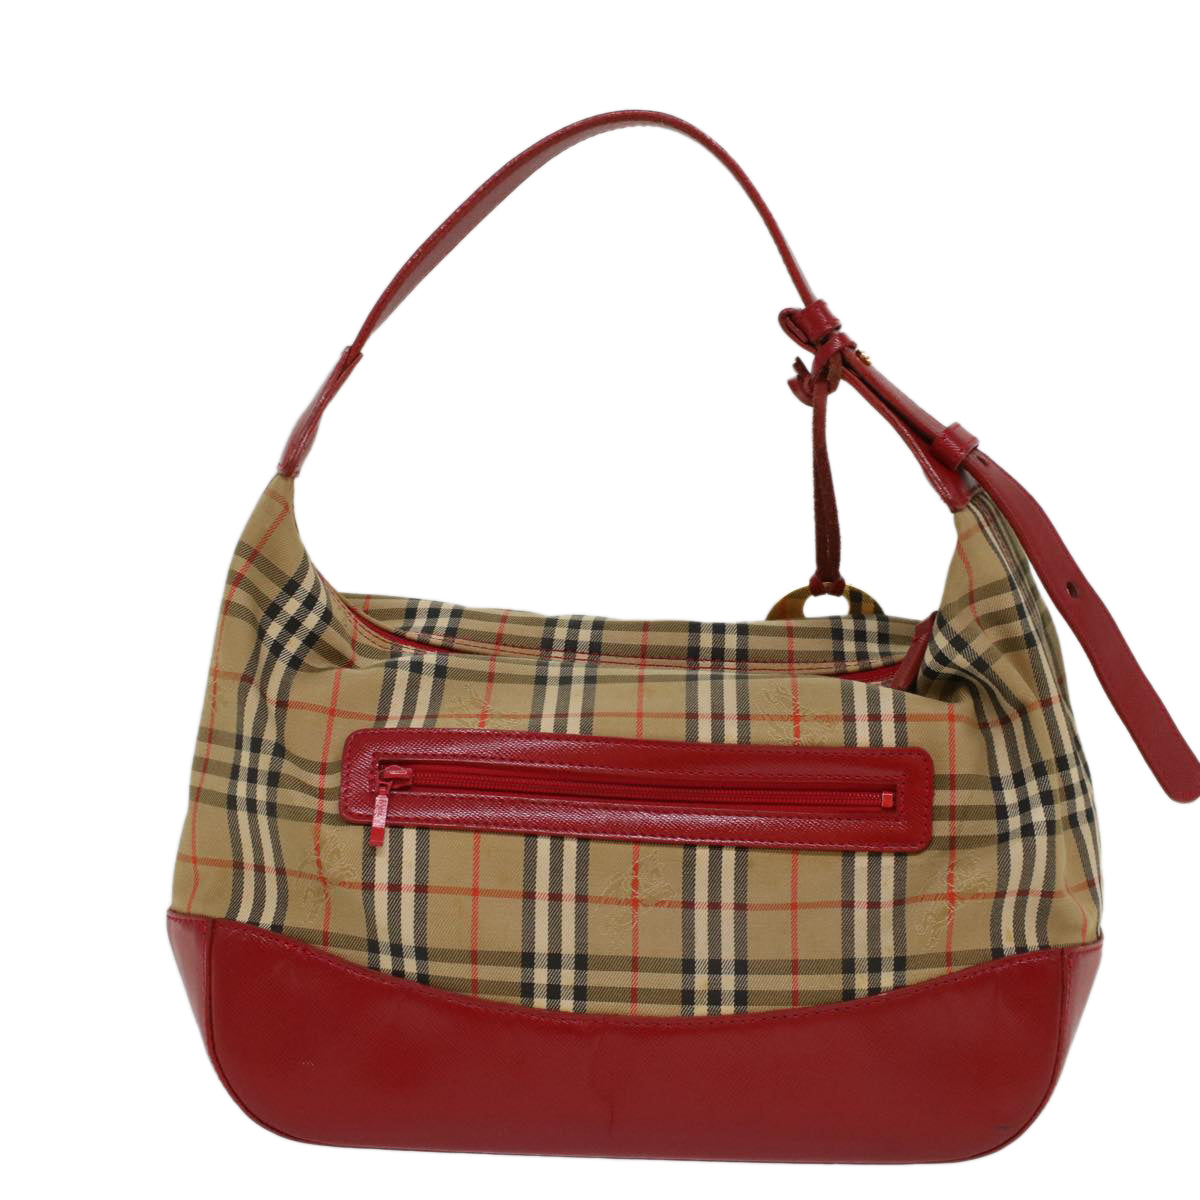 Burberrys Nova Check Hand Bag Canvas Leather Beige Red Auth 53395